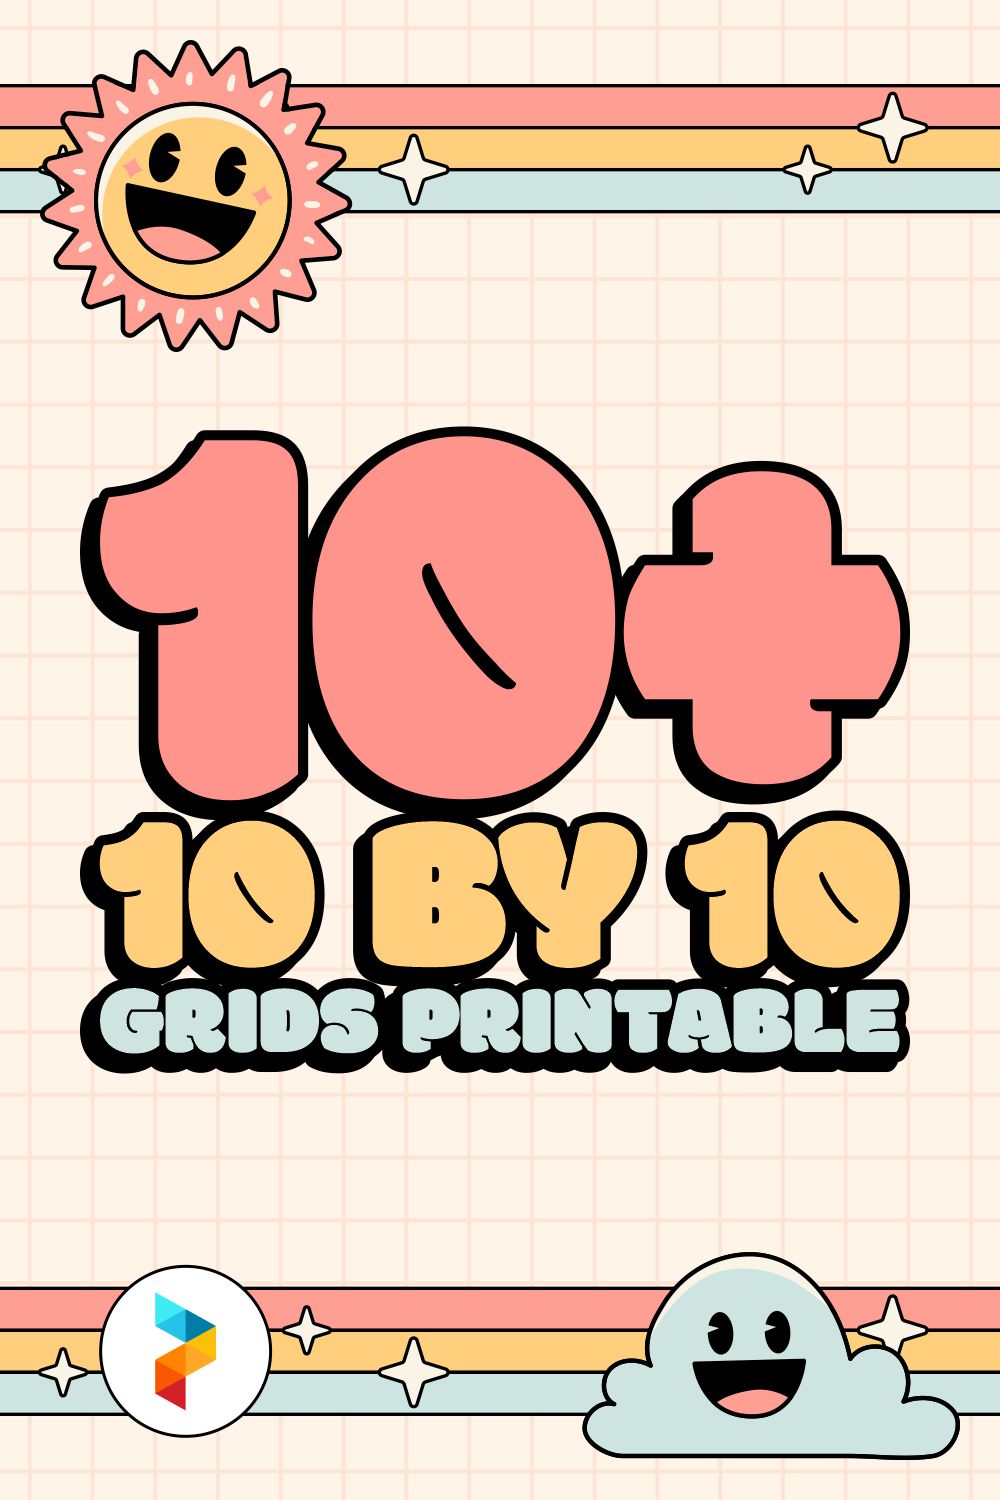 10 By 10 Grids